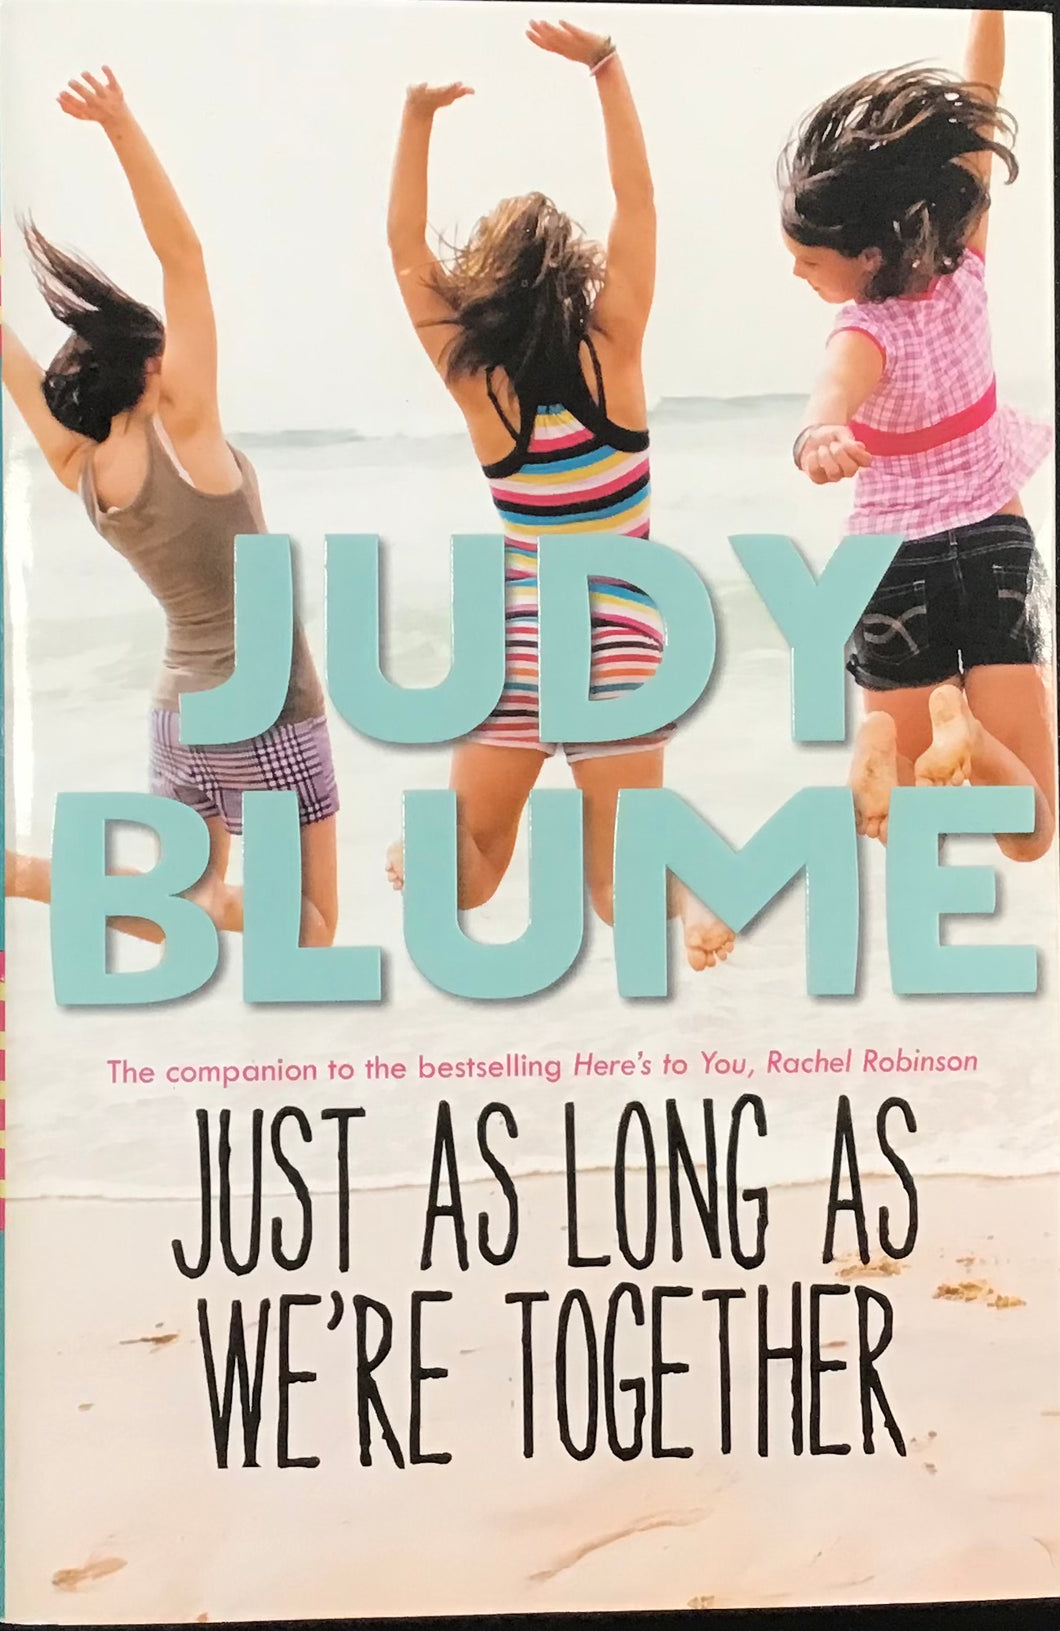 Just As Long As We’re Together, Judy Blume